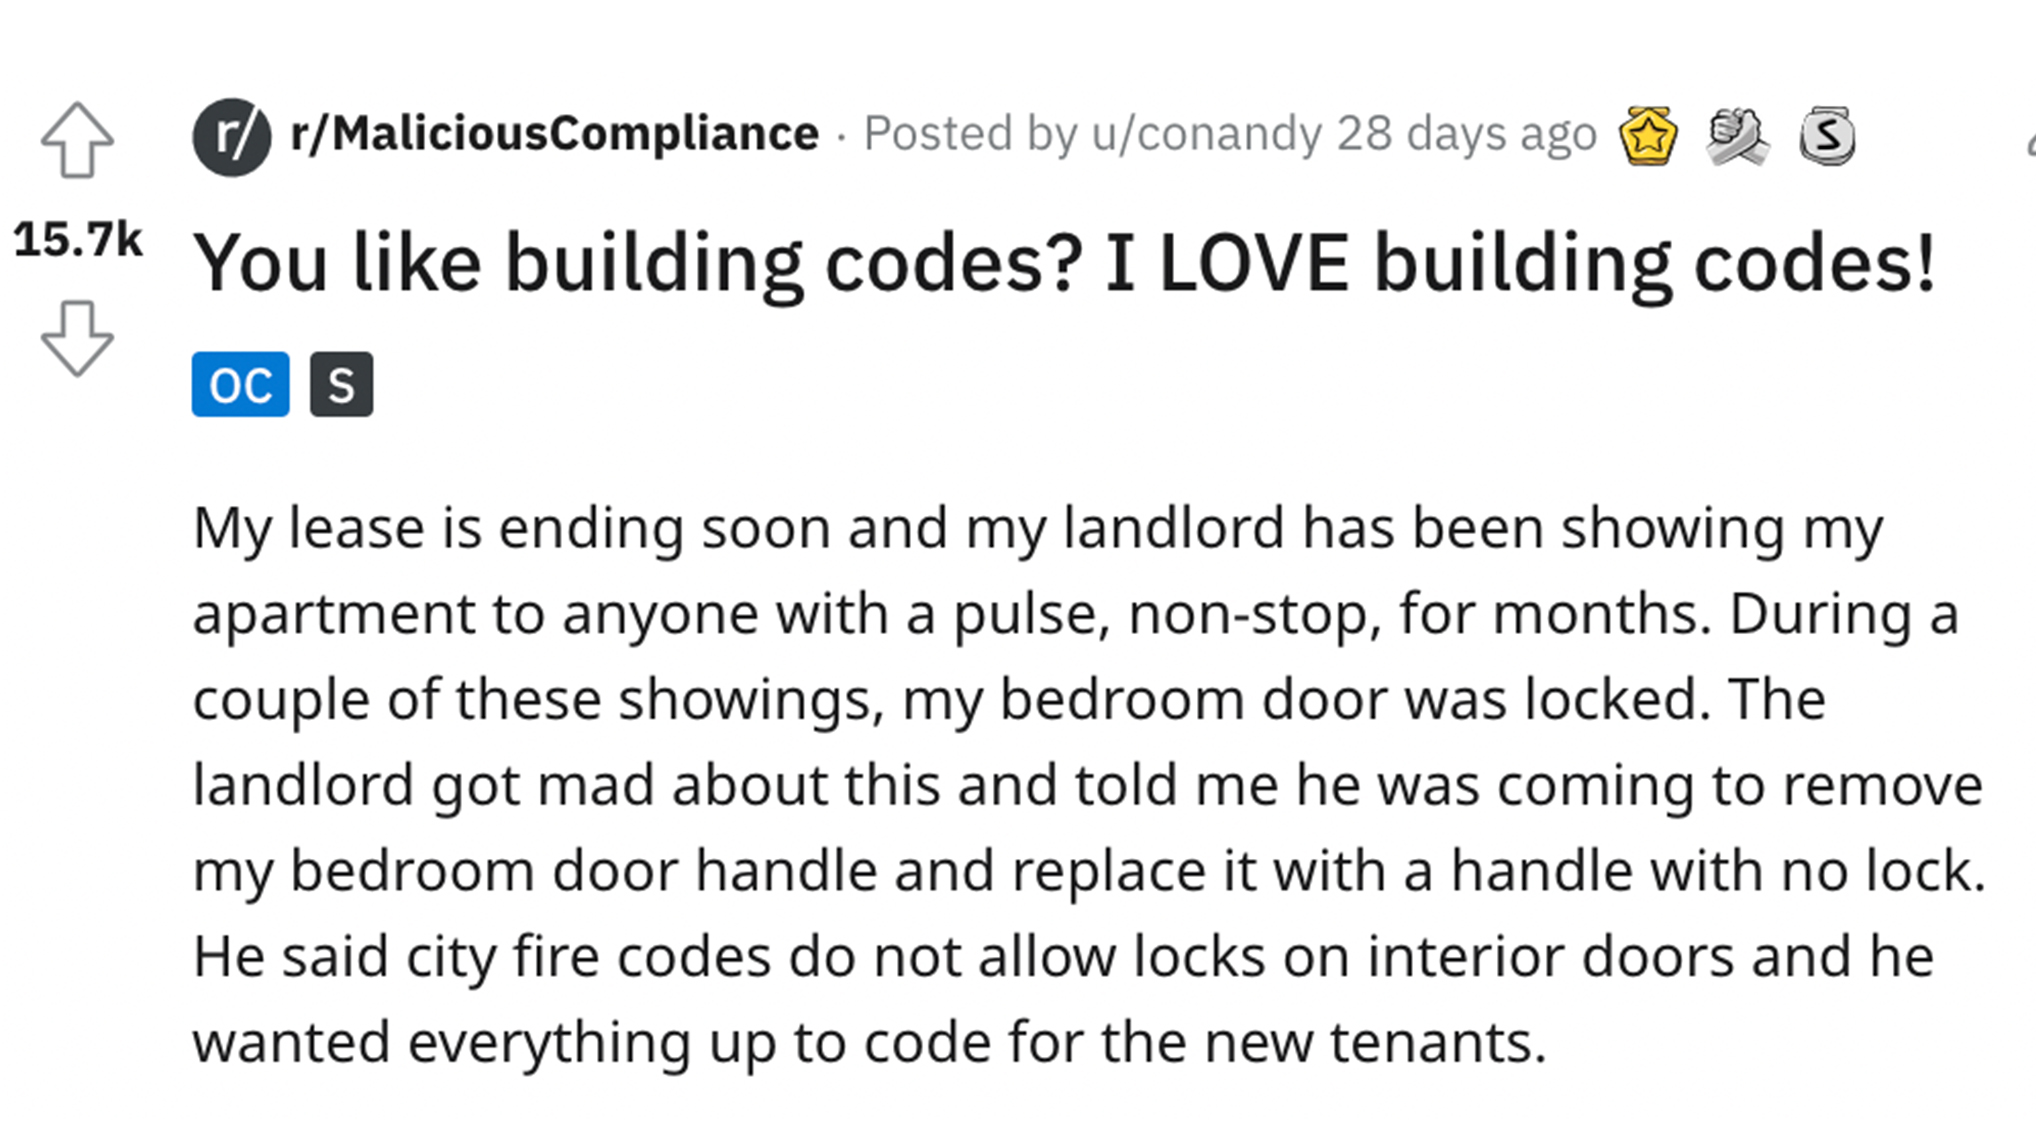 Tenant Tells Off Landlord - 3 rrMaliciousCompliance Posted by uconandy 28 days ago You building codes? I Love building codes! Oc S My lease is ending soon and my landlord has been showing my apartment to anyone with a pulse, nonstop, for months. During a 